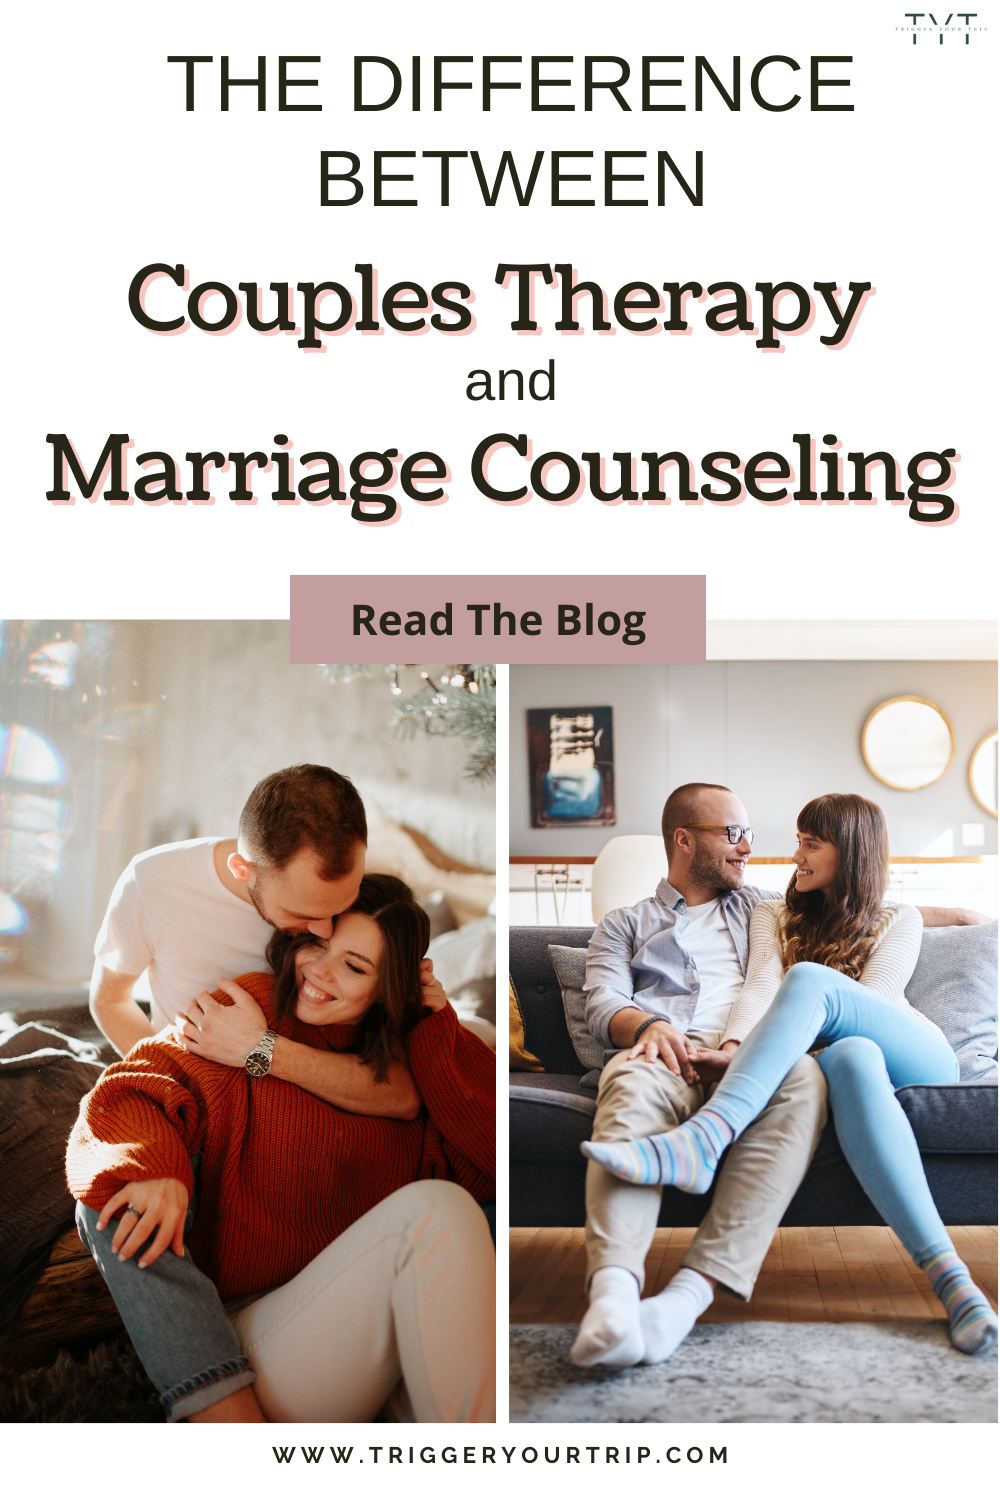 marriage counseling and couples counseling differences